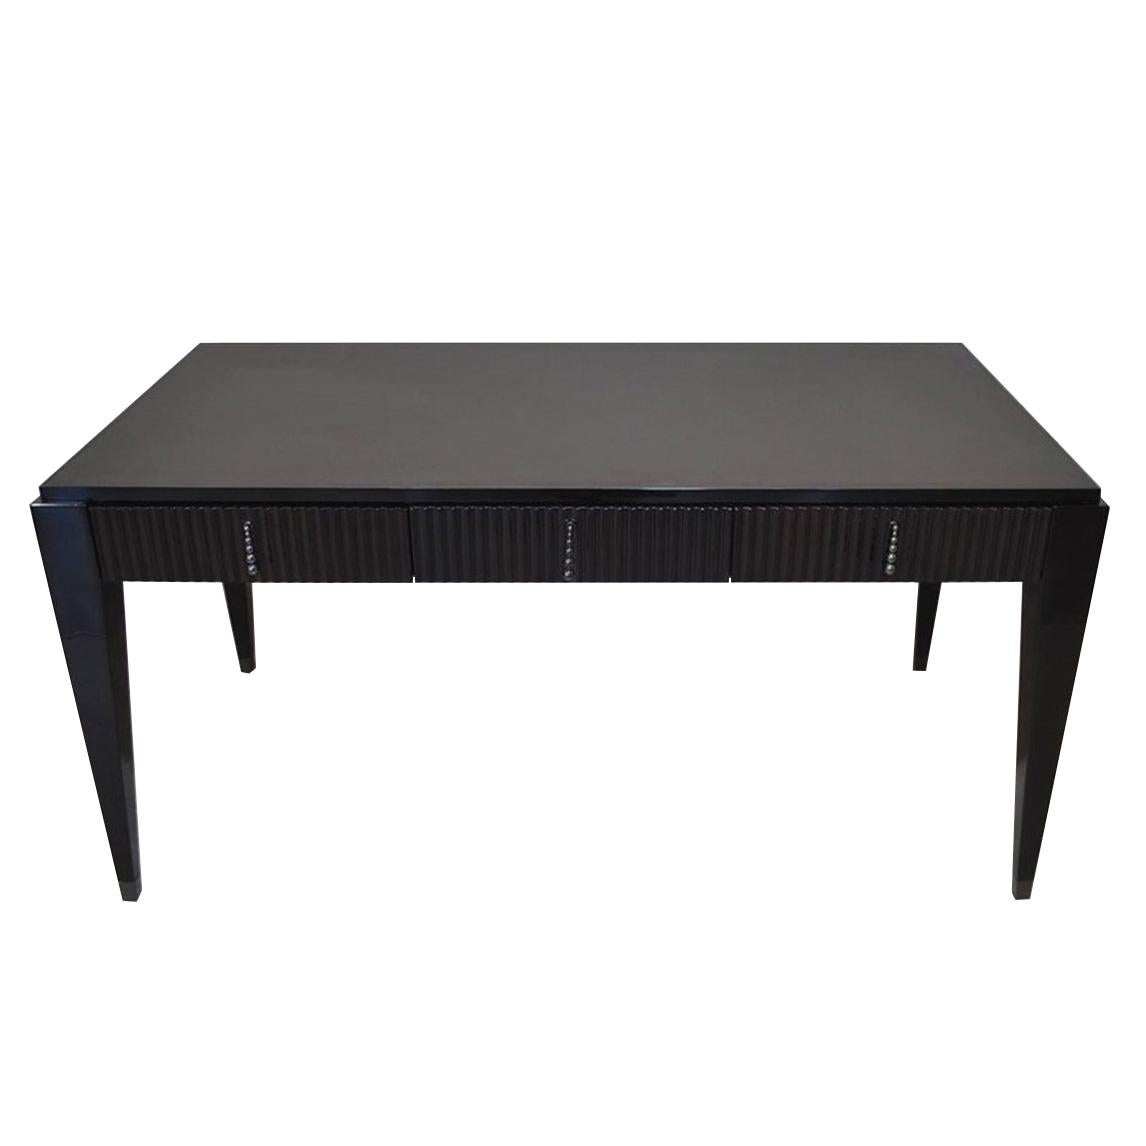 Italian ‘Klab D’ Contemporary Ebony High-Gloss Writing Desk with Leather Top For Sale